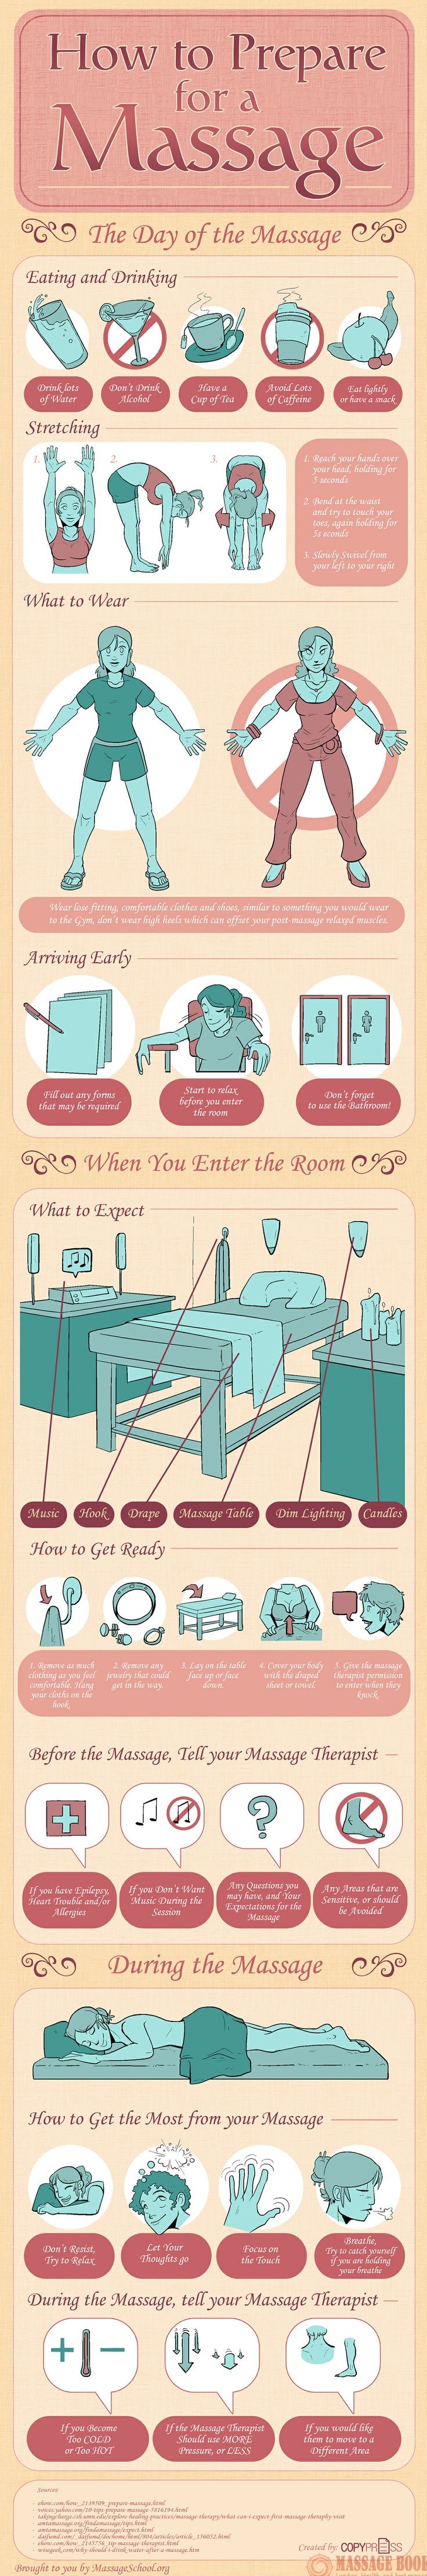 how to prepare your massage